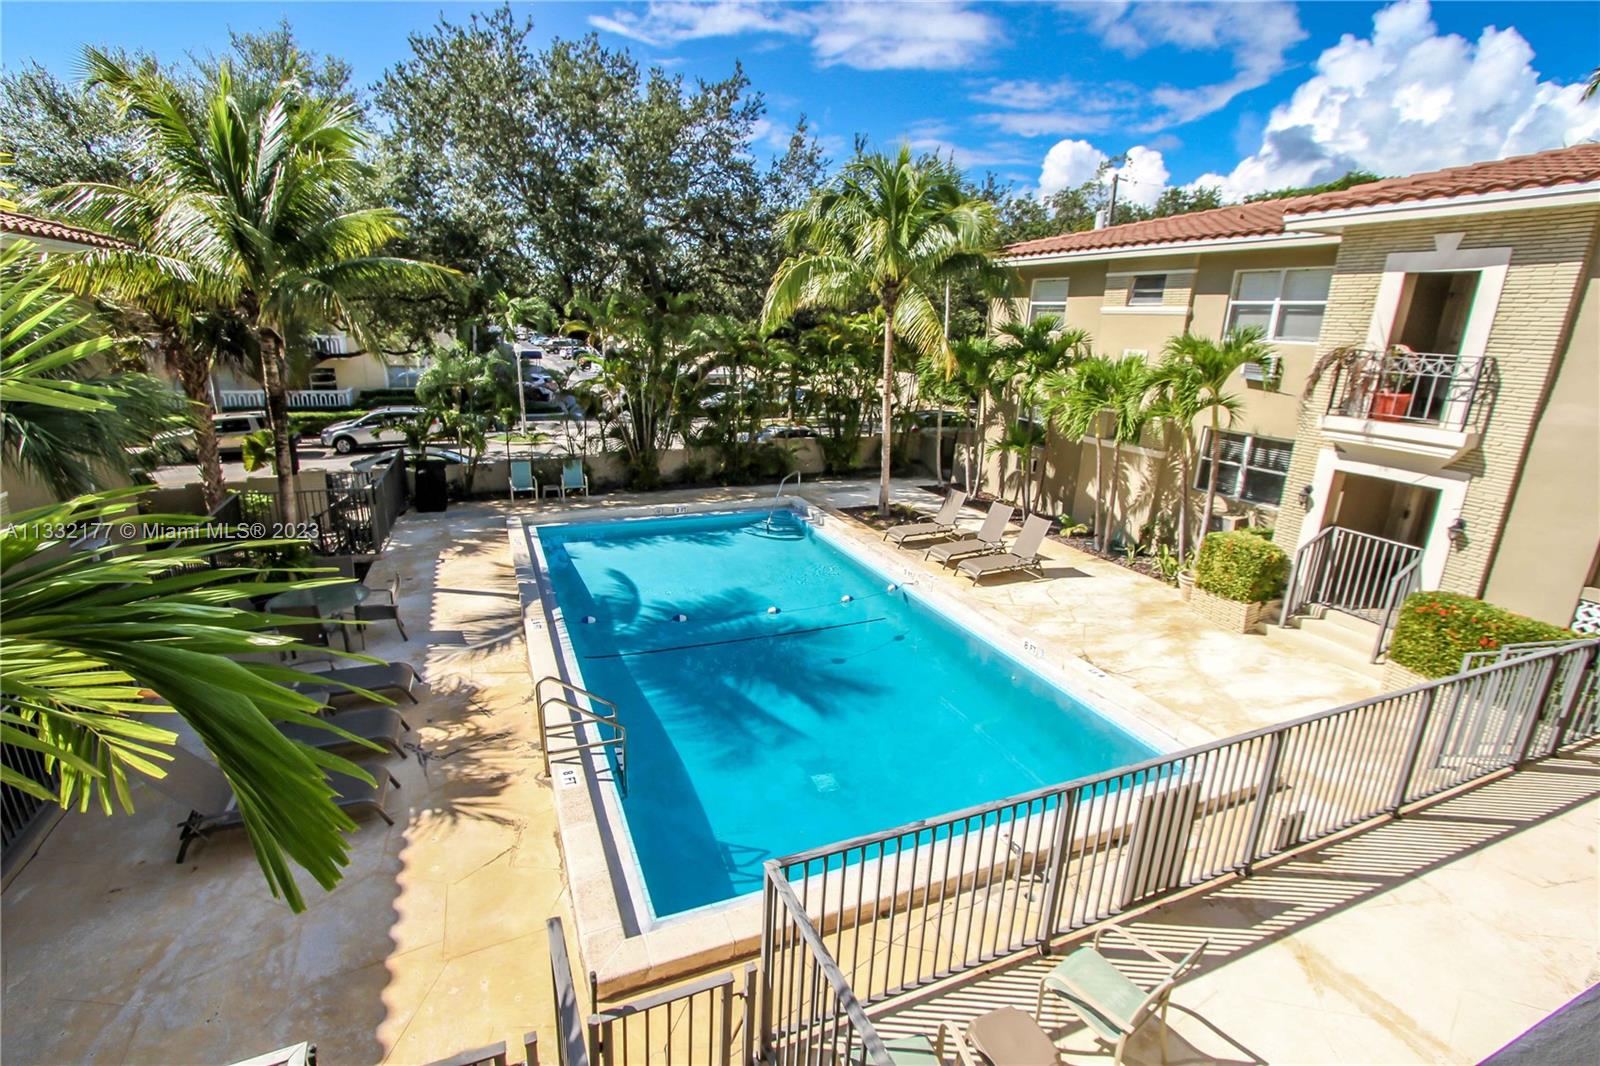 This wonderful 2/1 apartment is situated in the sought-after Edgewater/Sunset Harbor district of Coral Gables. Water included, and laundry service on-site. Recently updated with ample living area and kitchen with newer stainless steel appliances. These units seldom come available so here is an opportunity to relocate to this exquisite area near Ingraham Park and Cocoplum Circle on the Gables waterway. Here you can stroll tree-lined streets or take a short bike ride for breakfast in the Grove. Here is a location so close to everything, but so far removed from traffic and congestion you feel as if you have been transported to another world. Very quick processing time.